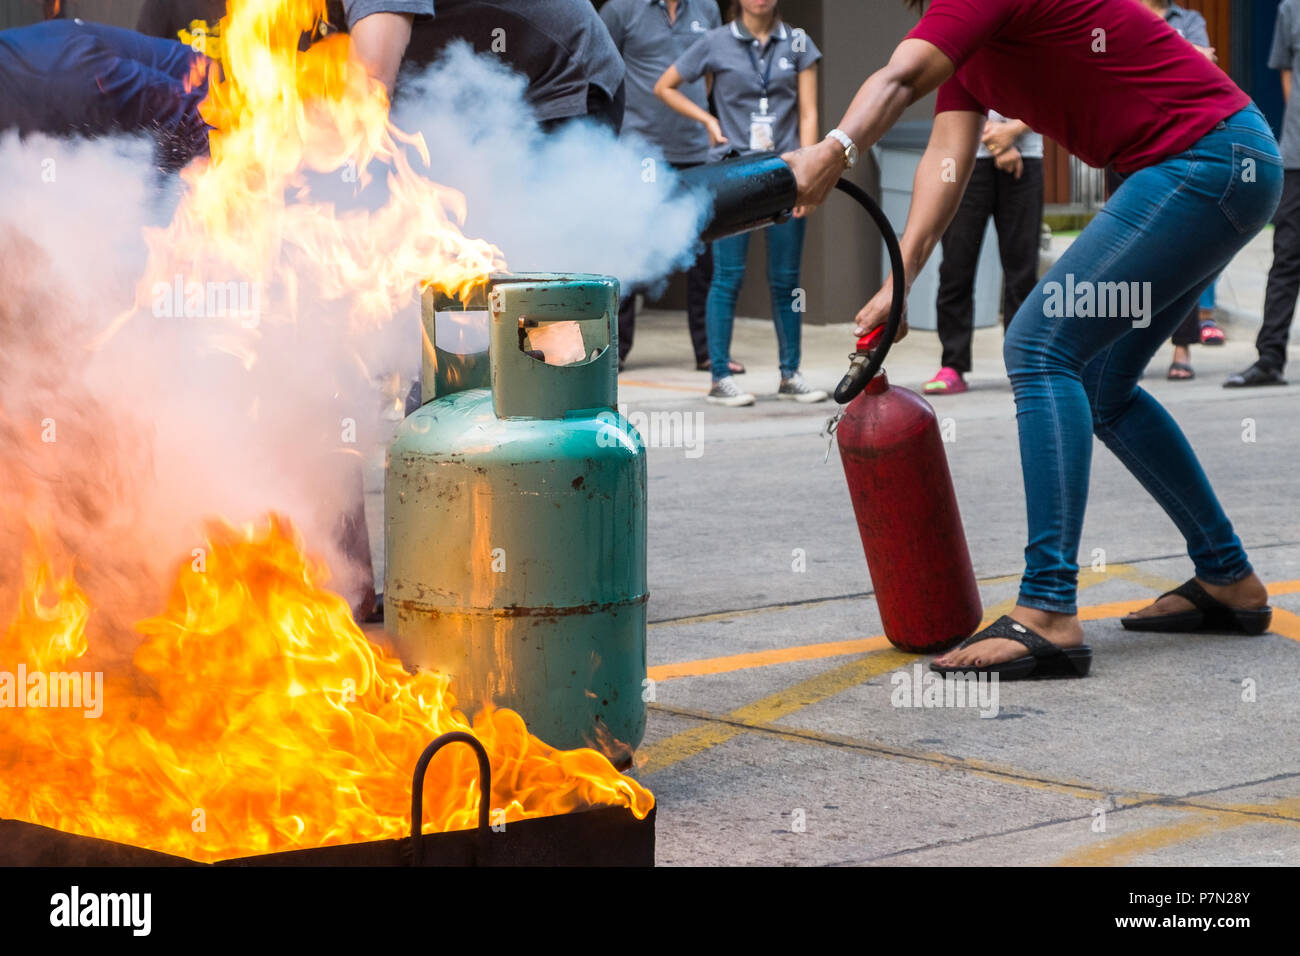 Employees firefighting training,Extinguish a fire at the gas cylinder. Stock Photo